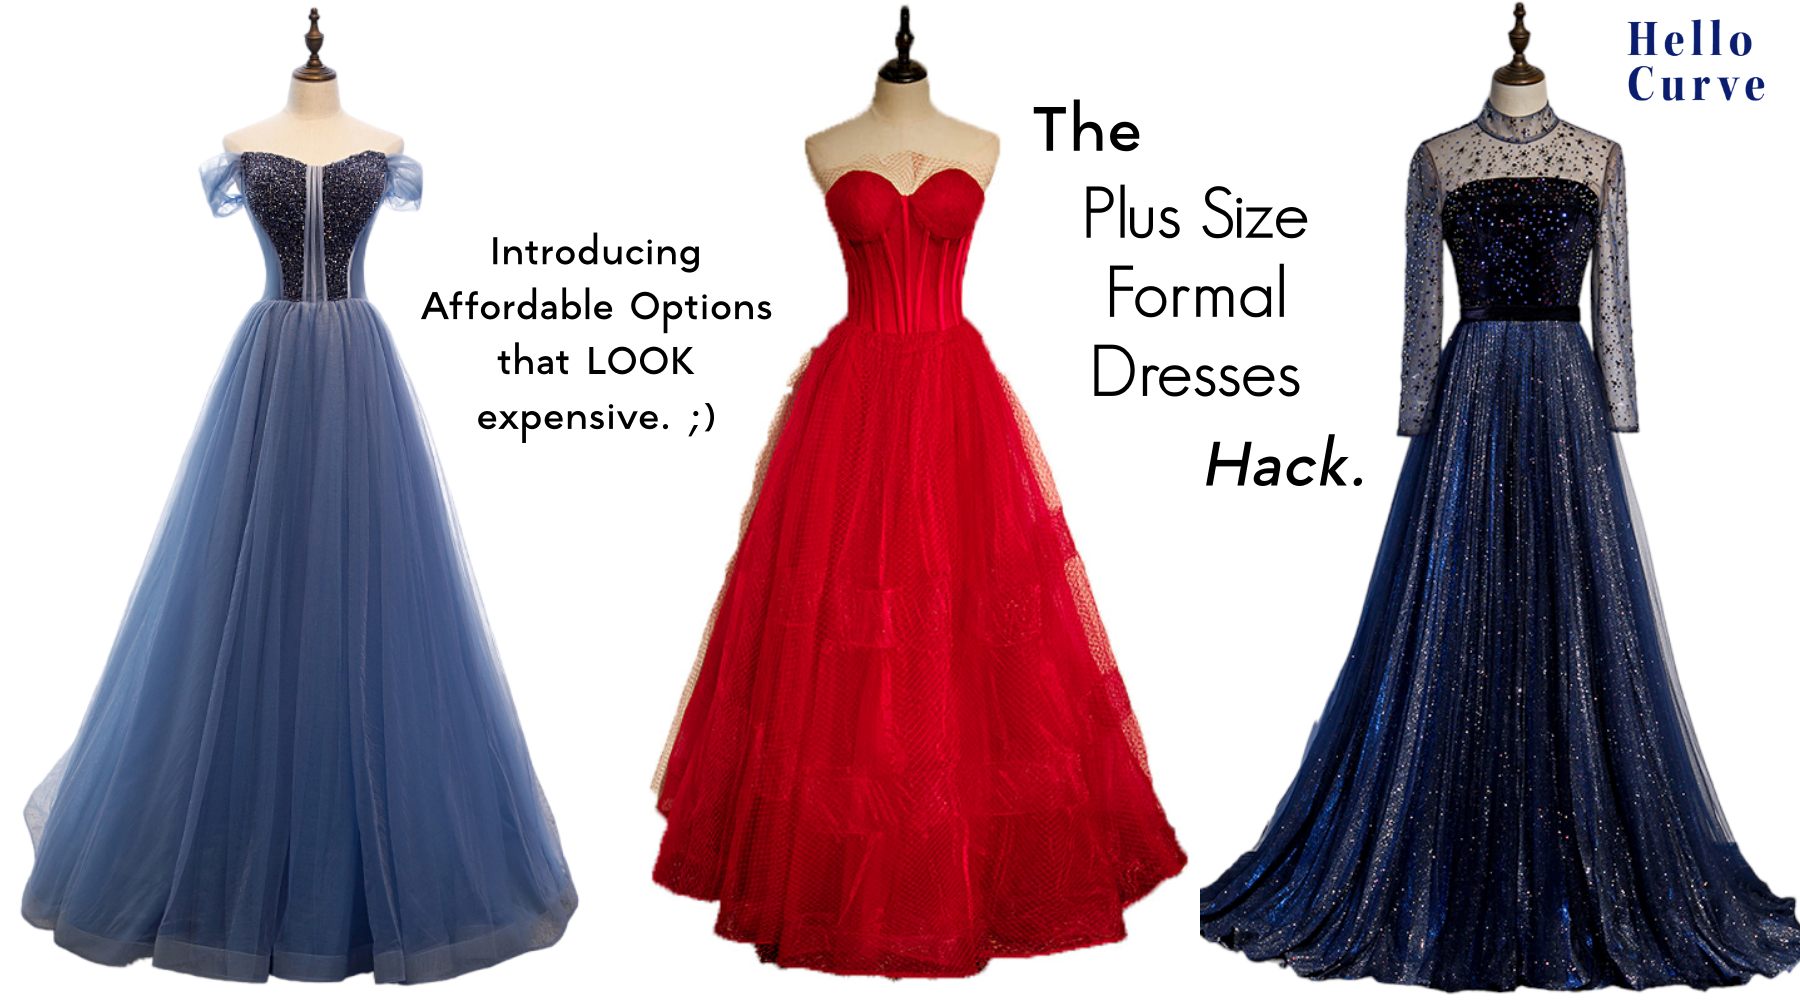 Plus Size Formal Dresses: Affordable Options That Look Expensive